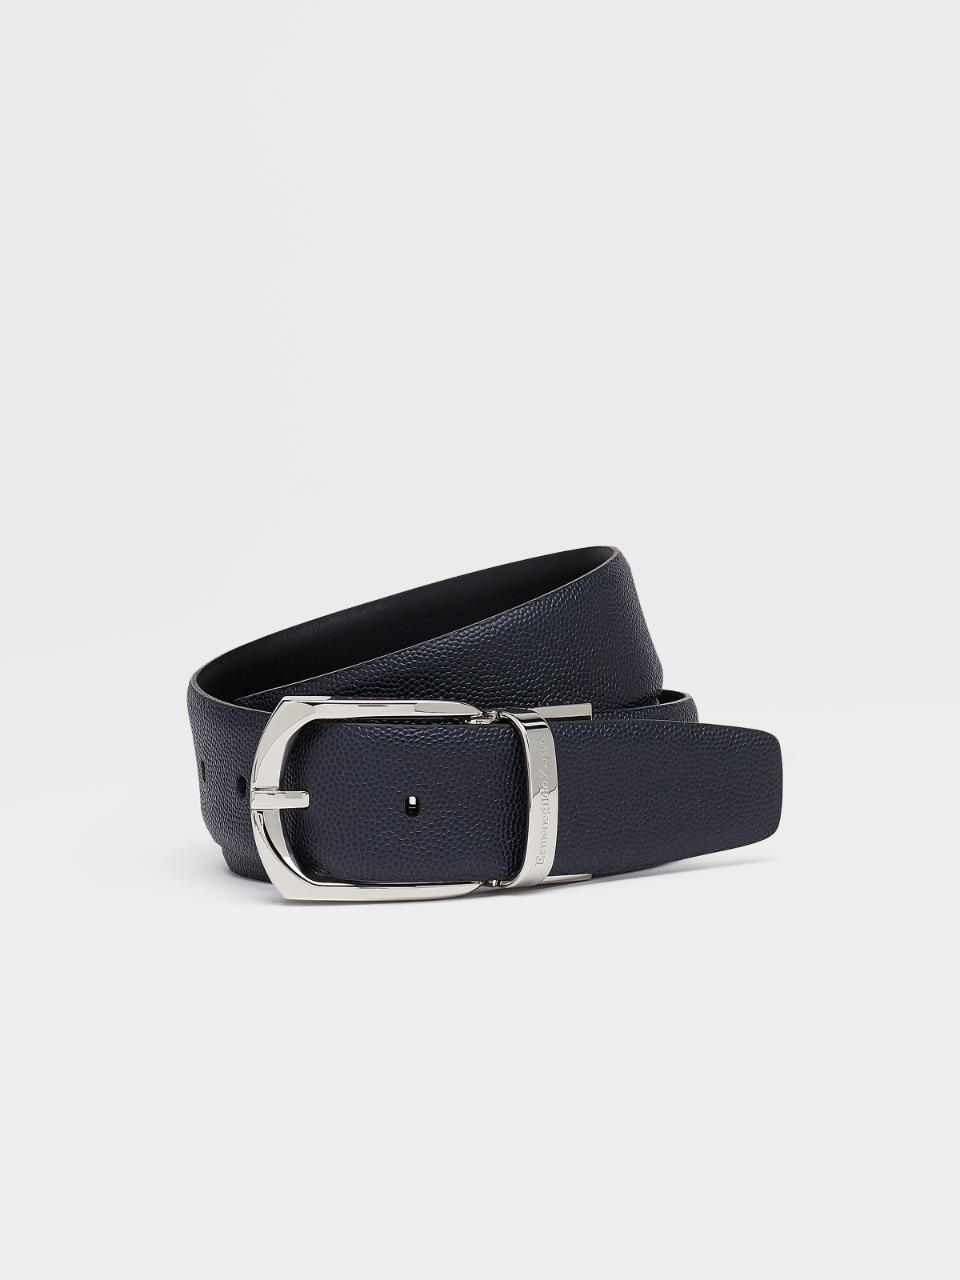 Navy Blue Grained Leather and Black Smooth Leather Reversible Belt